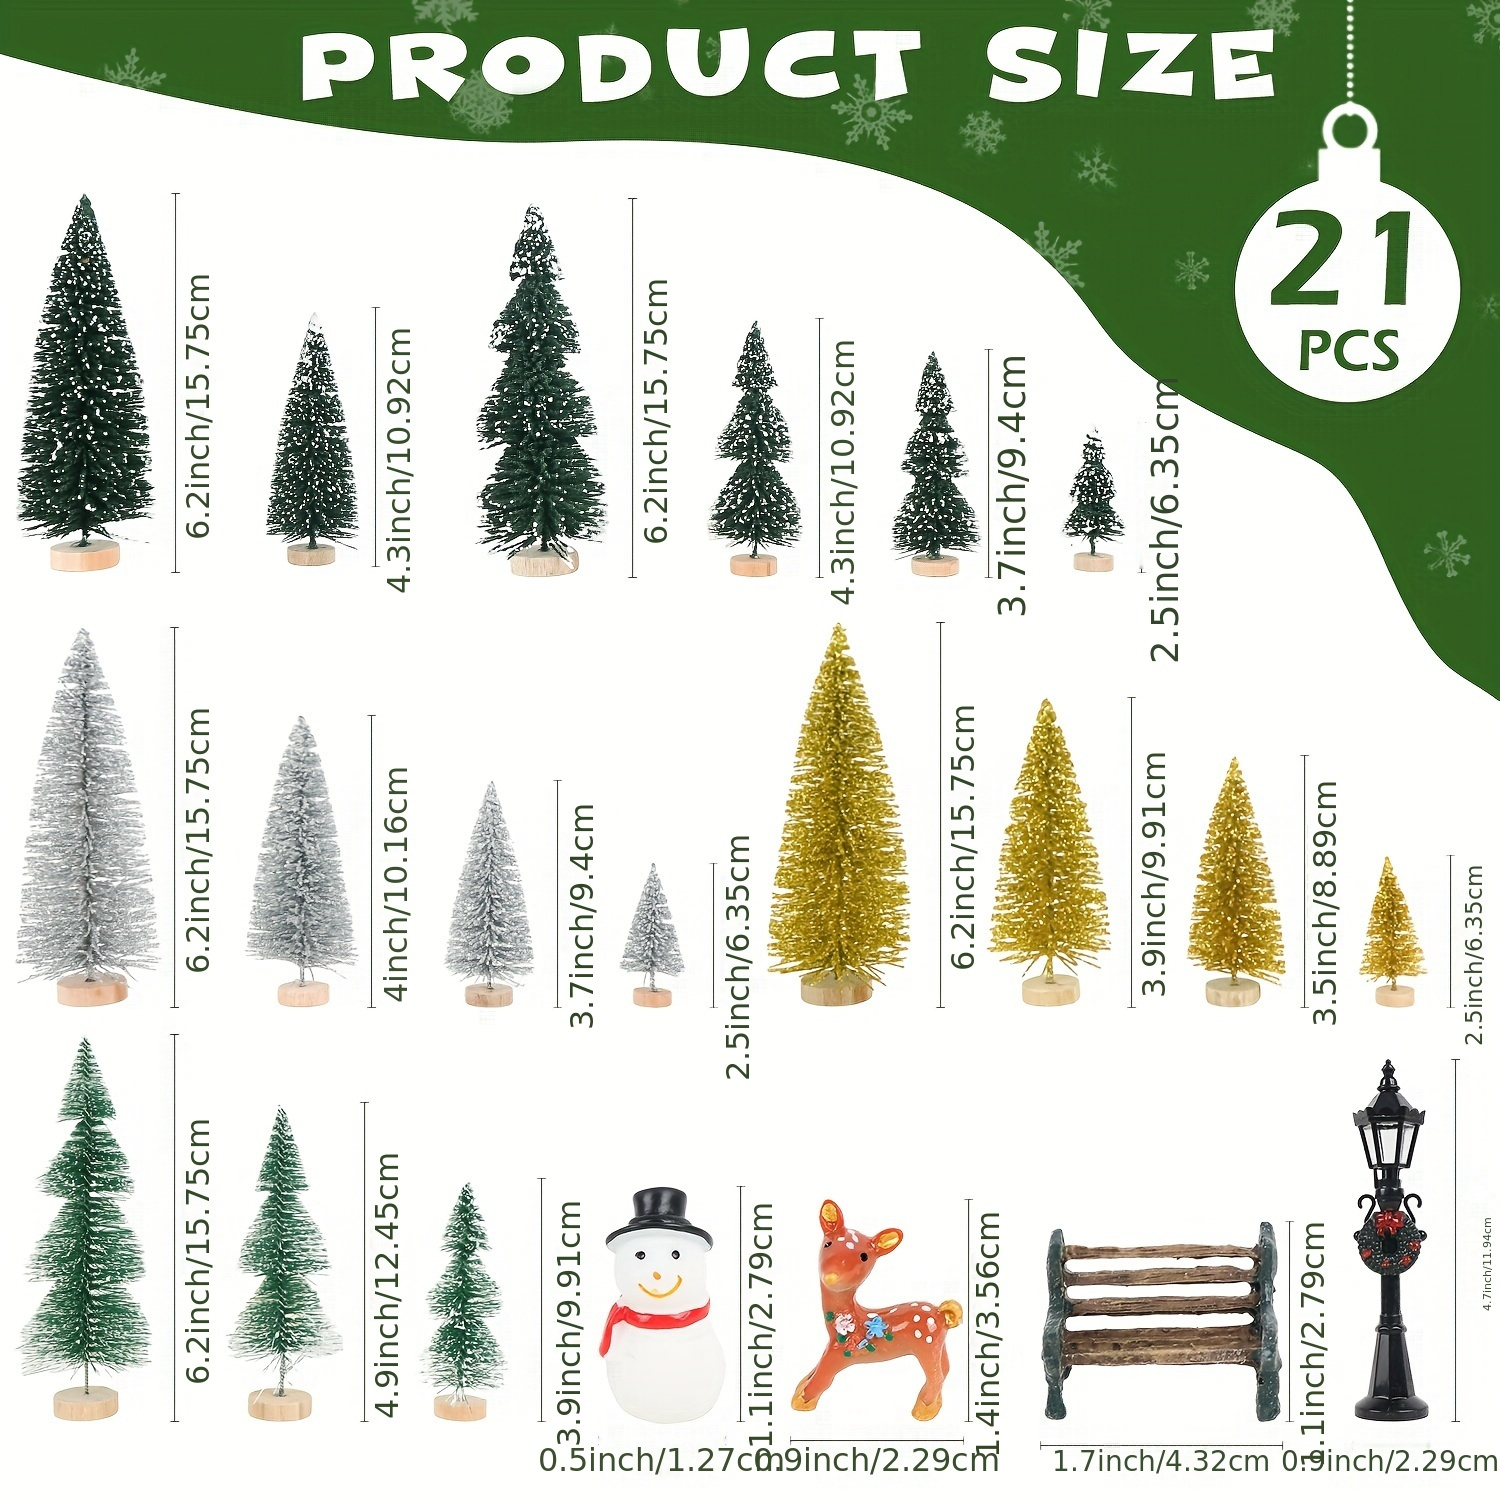  KUUQA Mini Christmas Trees Bottle Brush Trees with Snowmen  Reindeer, 31Pcs Christmas Village Sets Village Accessories Ornaments for  Christmas Decorations Indoor Village Display Platforms Winter Decor : Home  & Kitchen